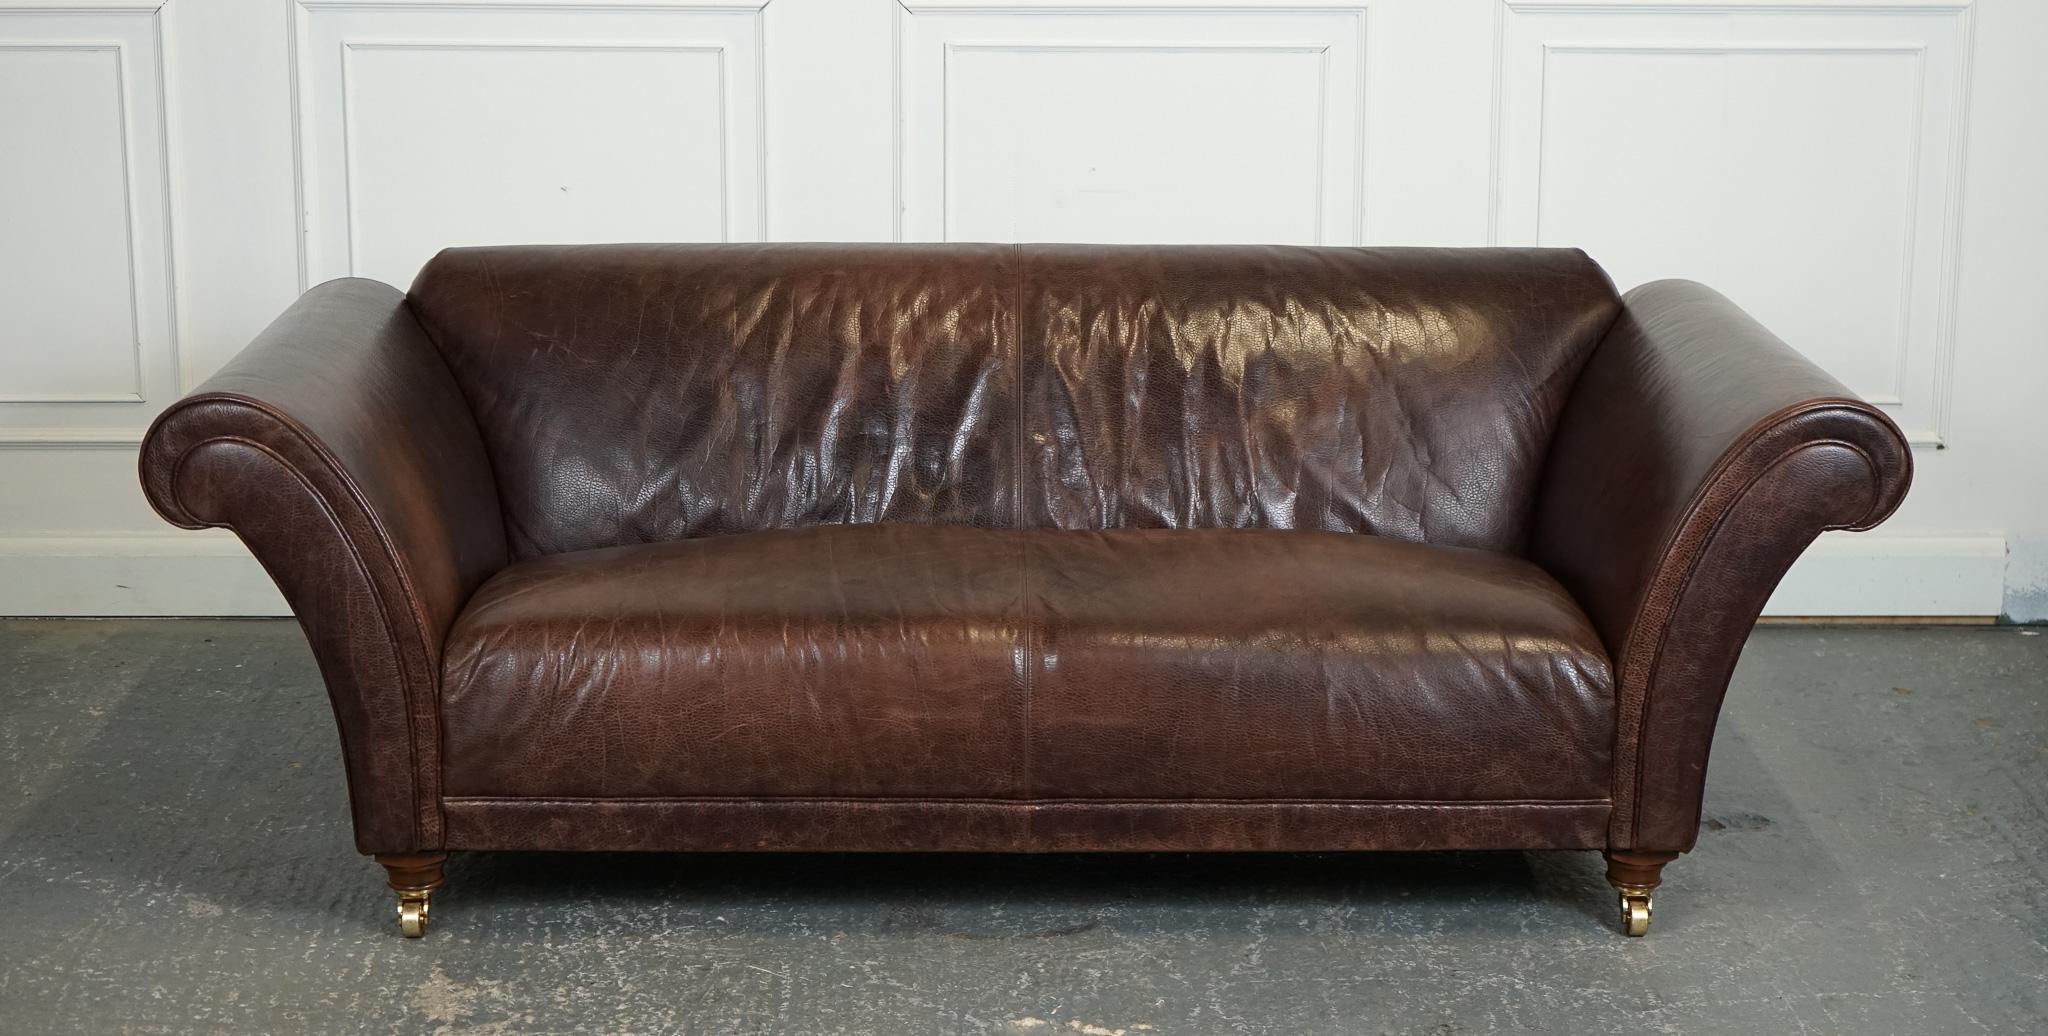 British STUNNING FISHPOOLS HERiTAGE BROWN LEATHER 2 TO 3 SEATER SOFA For Sale